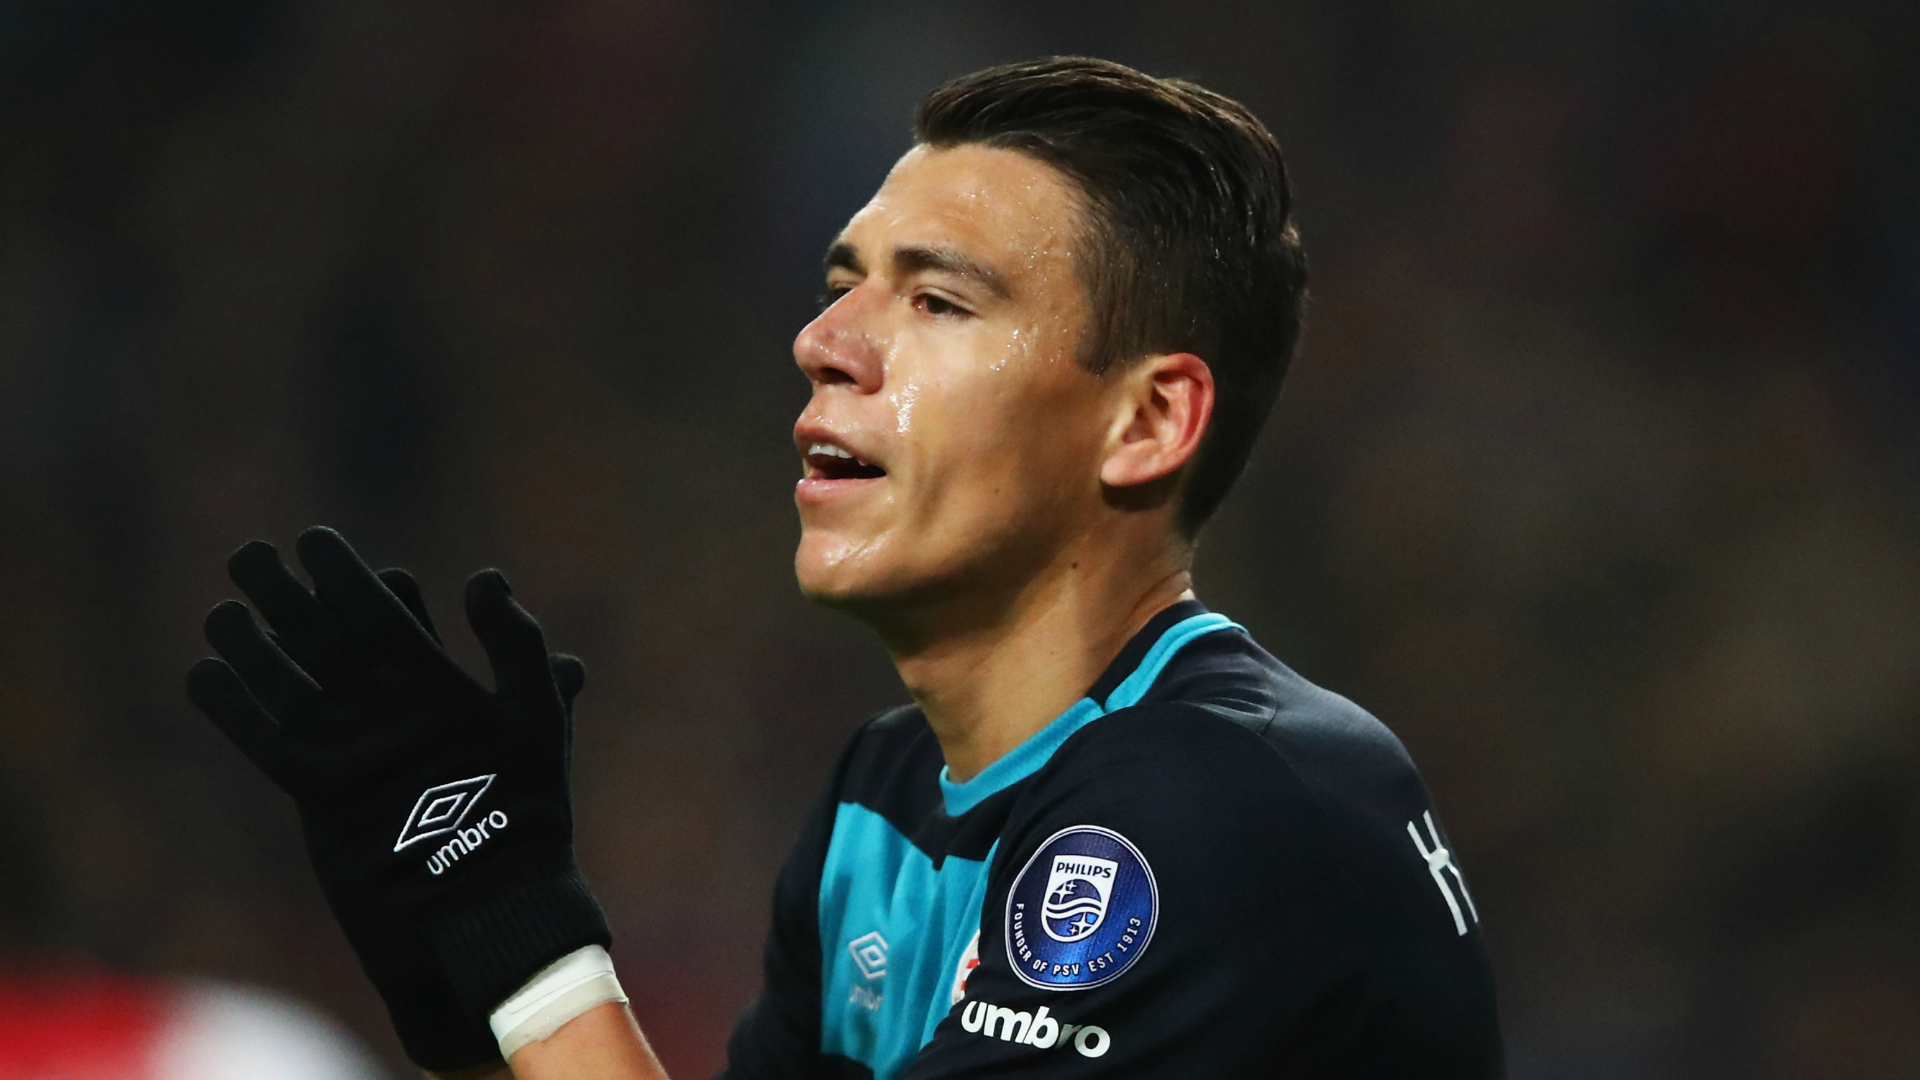 Mexico national team defender Hector Moreno's Roma move a good fit